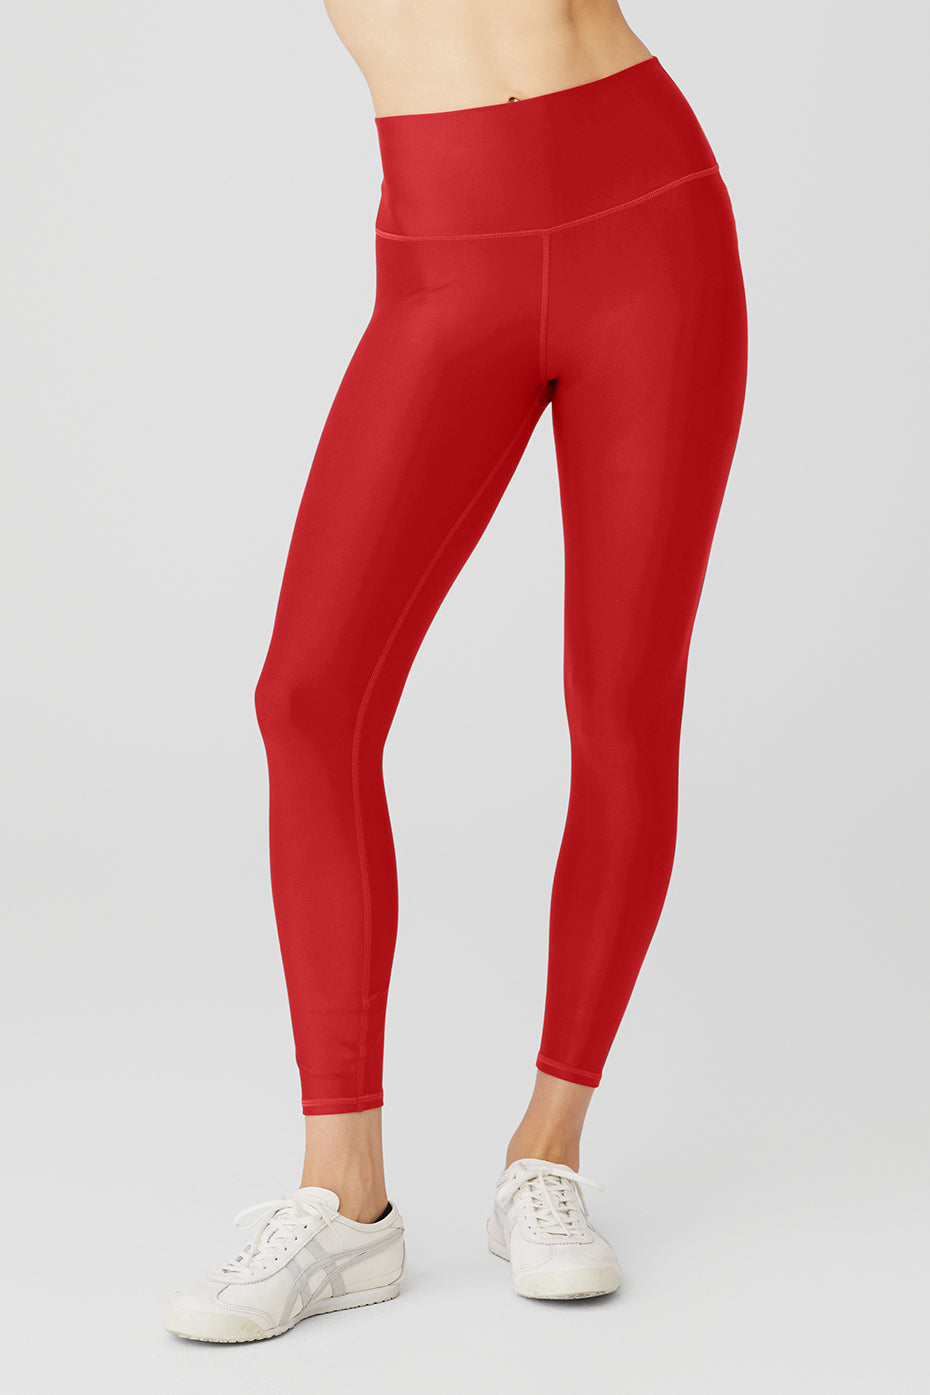 NWT💕ALO 7/8 High-Waist Airlift Legging in Lipstick Red Size XS